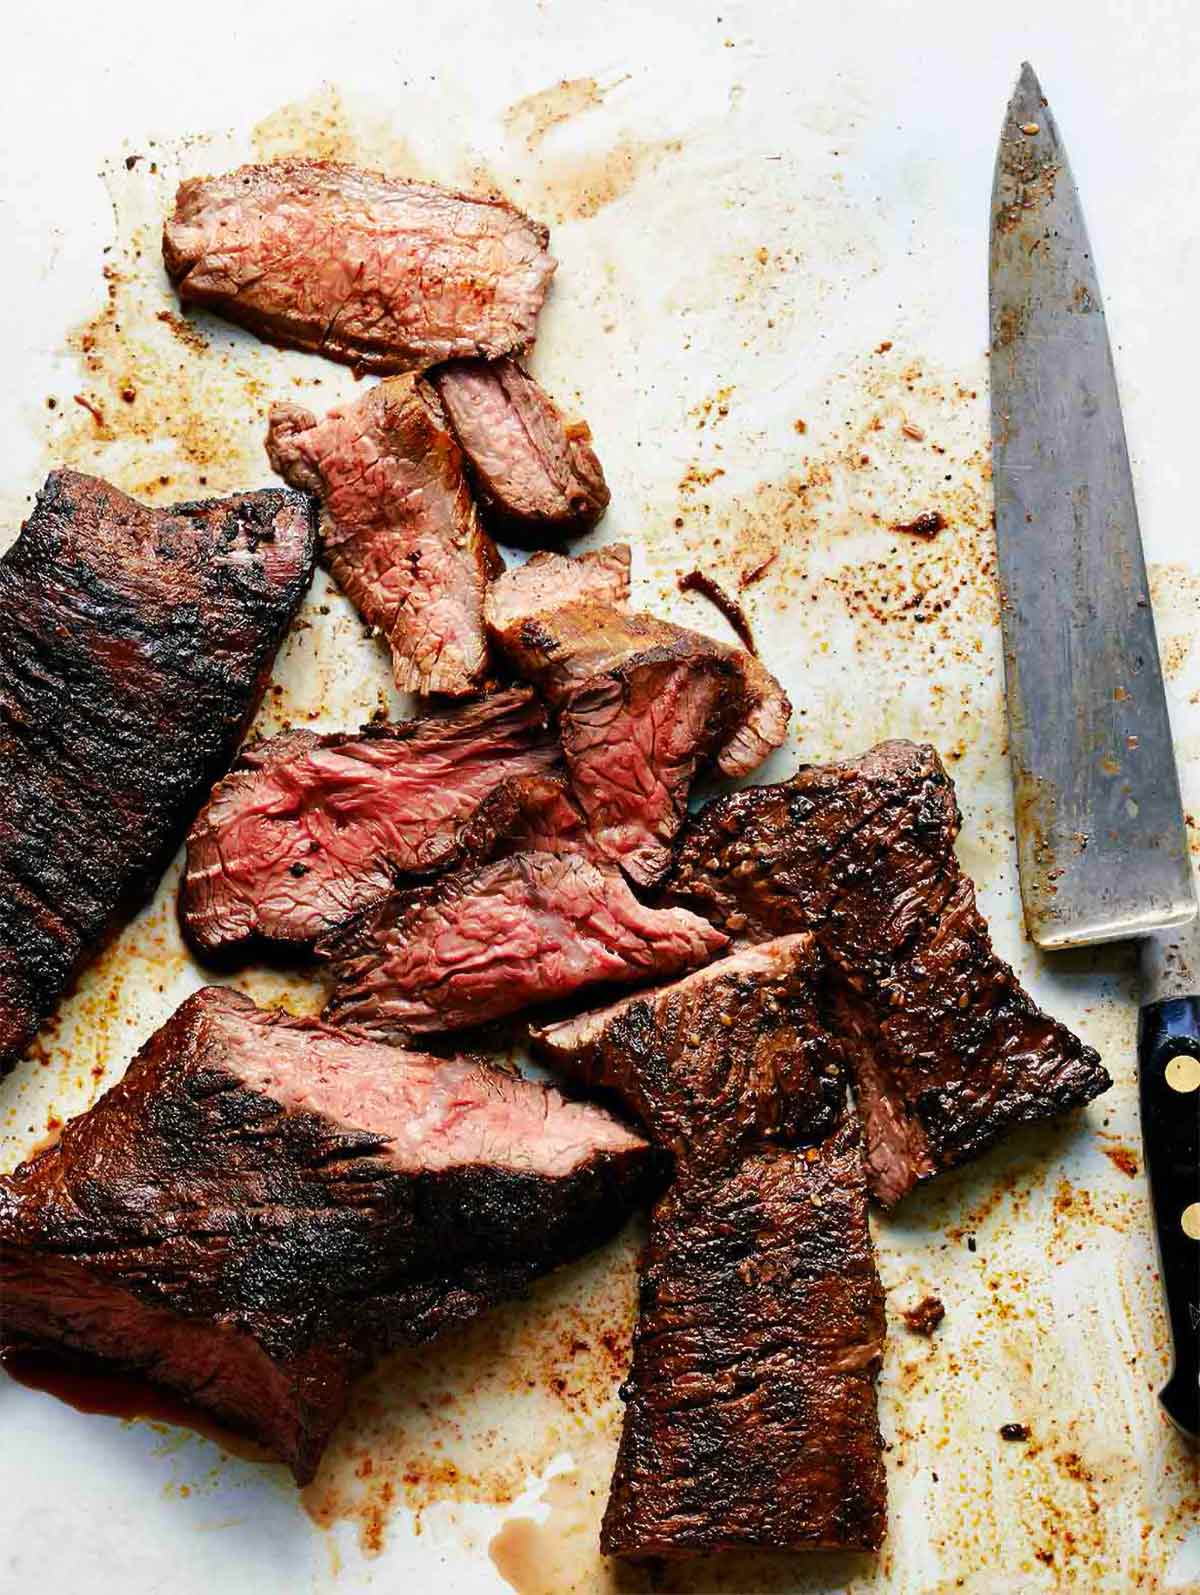 A sliced grilled steak with coffee spice rub and a carving knife lying beside it